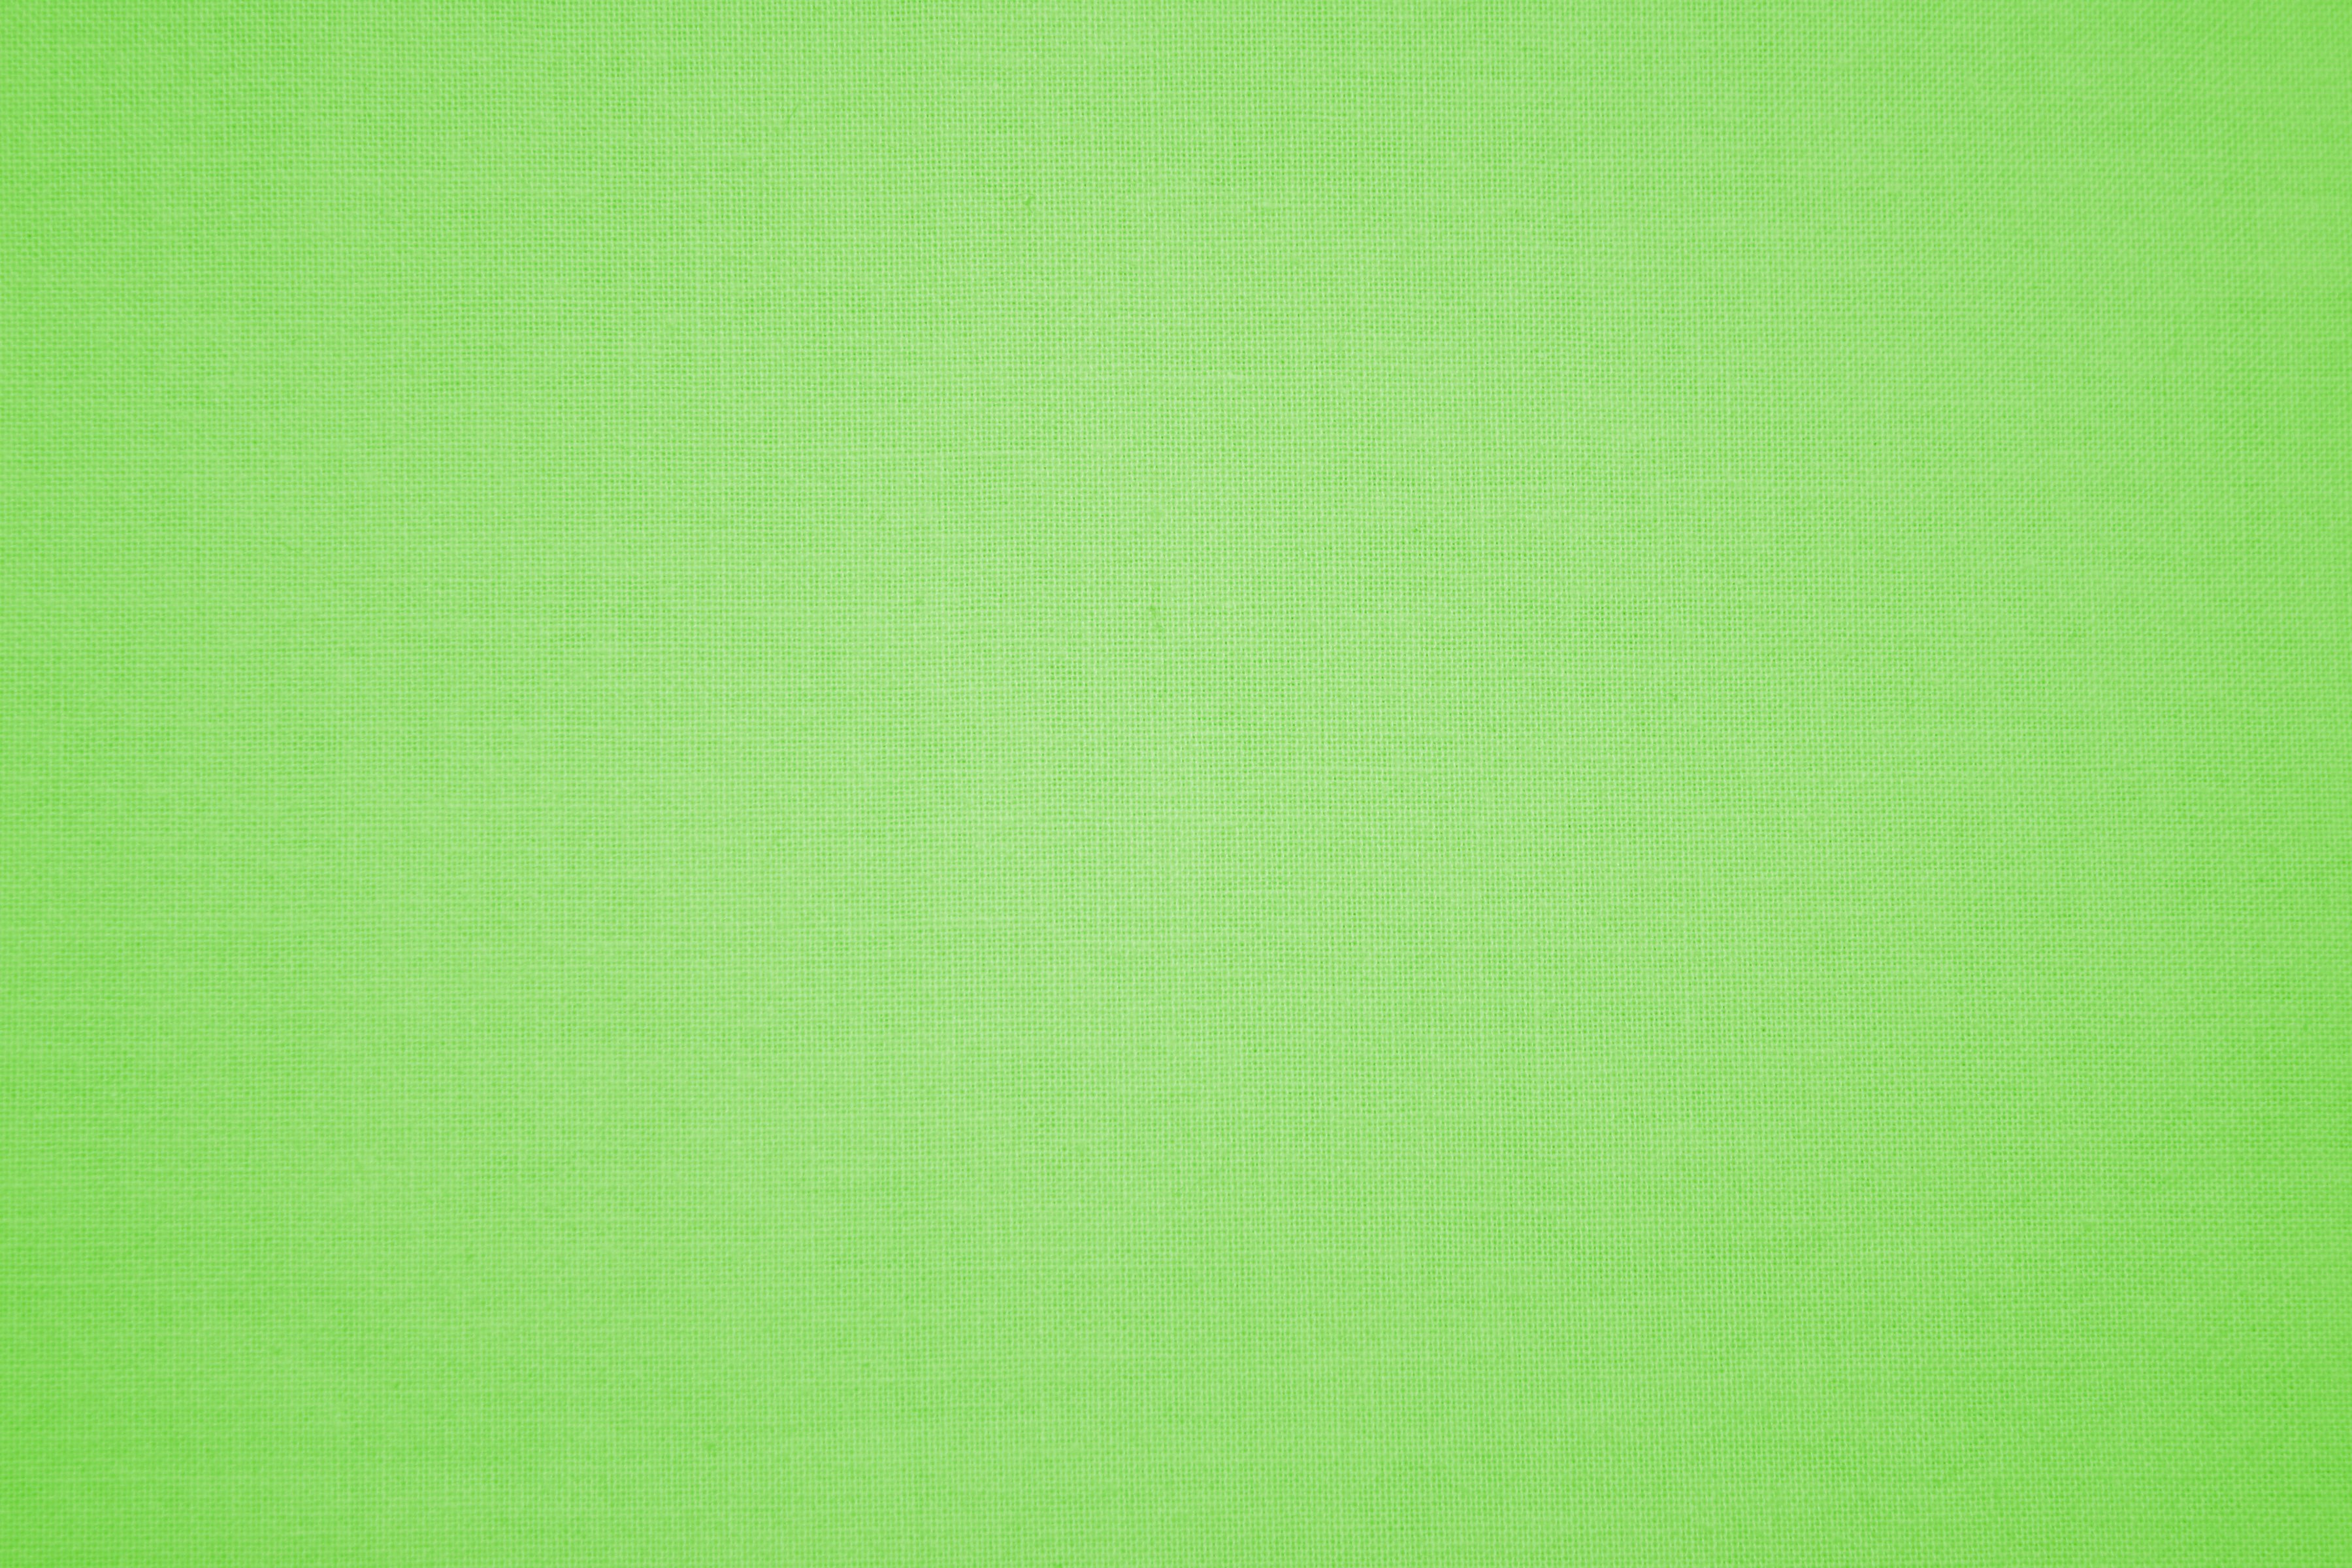 Lime Green S Fabric Texture Picture Photograph Photos